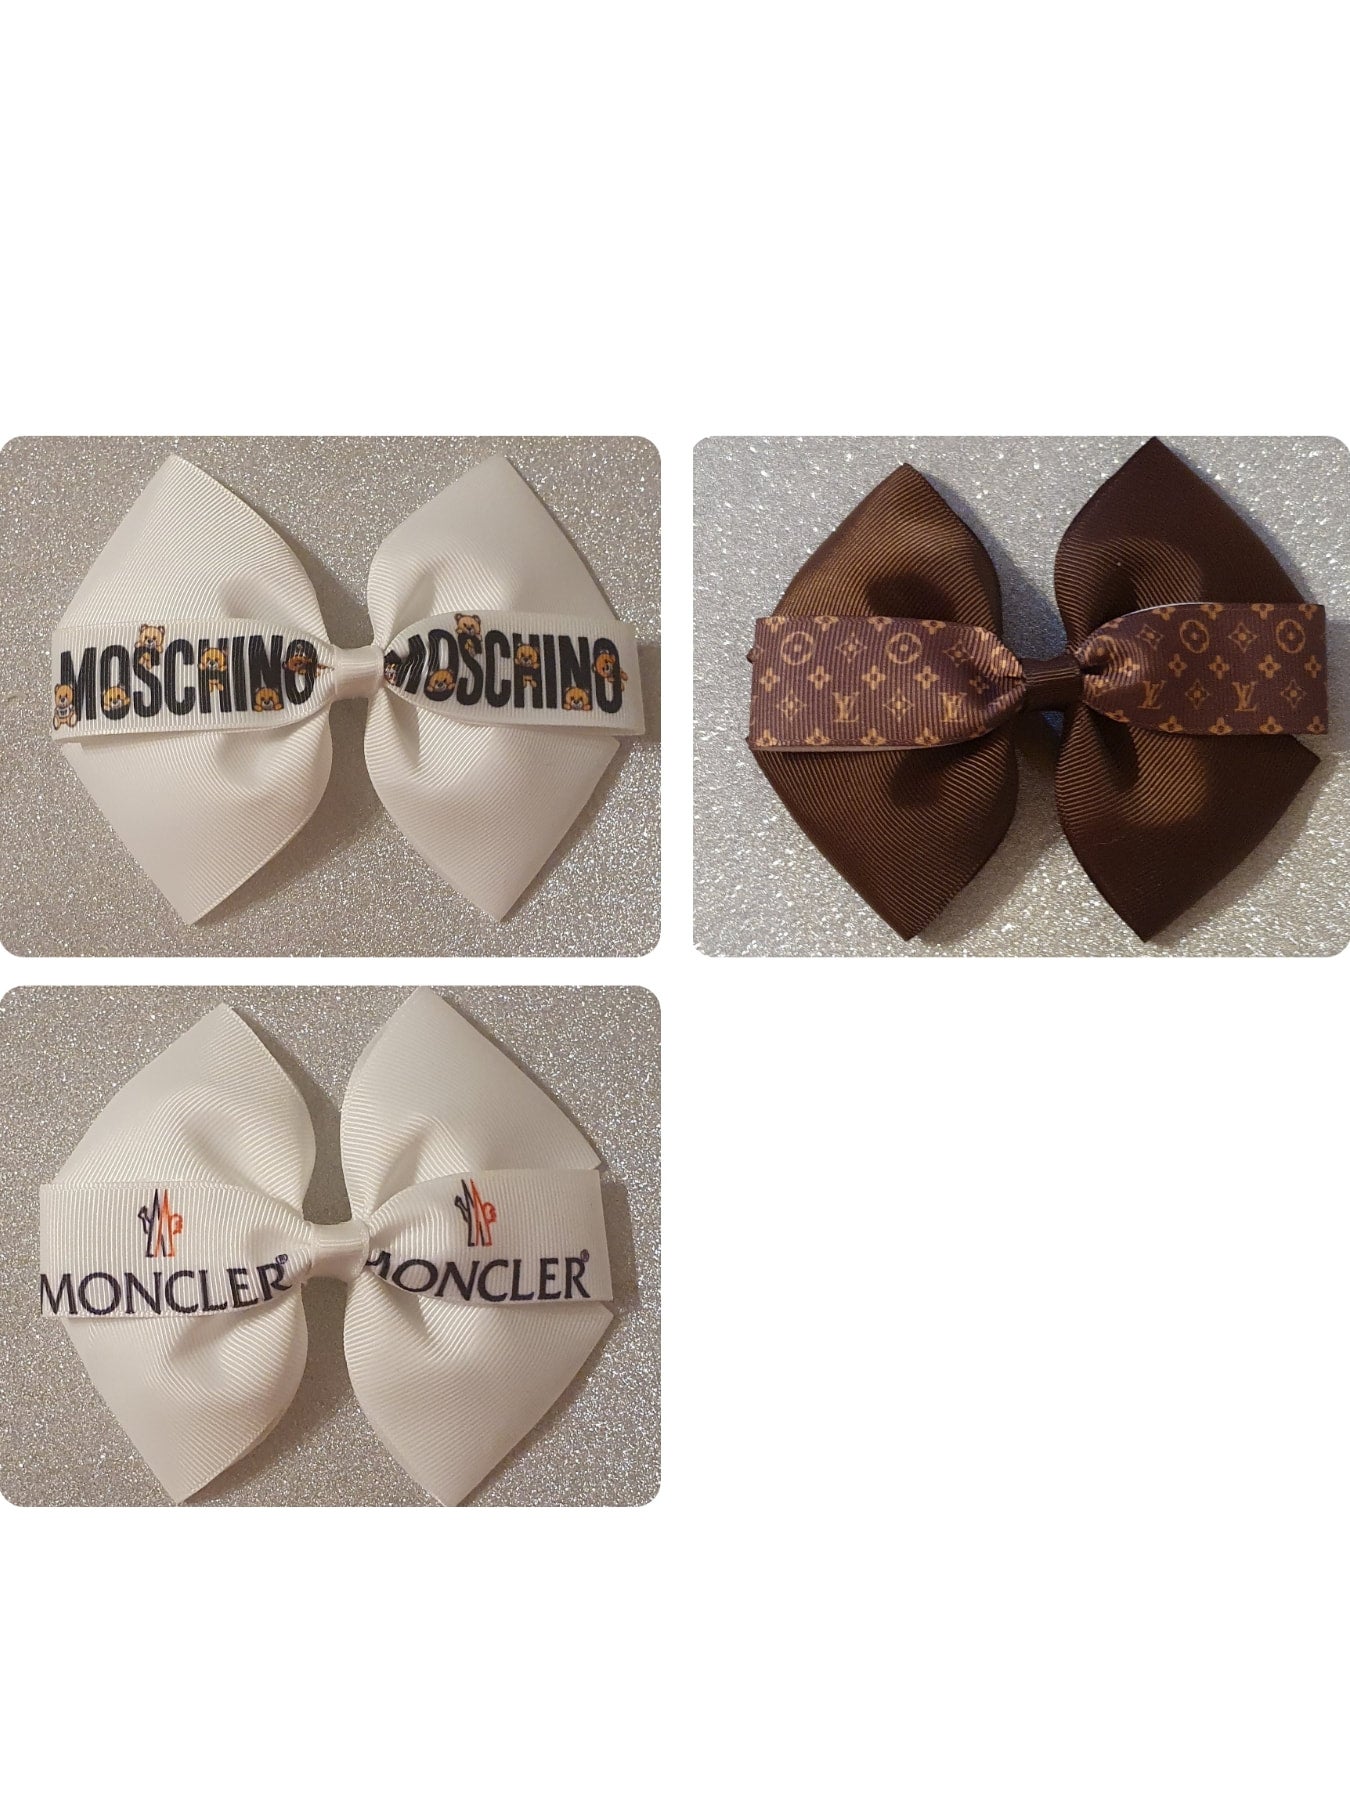 Wonderland Creations - Gucci Style Mini Hairbow or Headband 😍 Bow Style  Chloe 2 Design 225 Handmade to Order Our Website